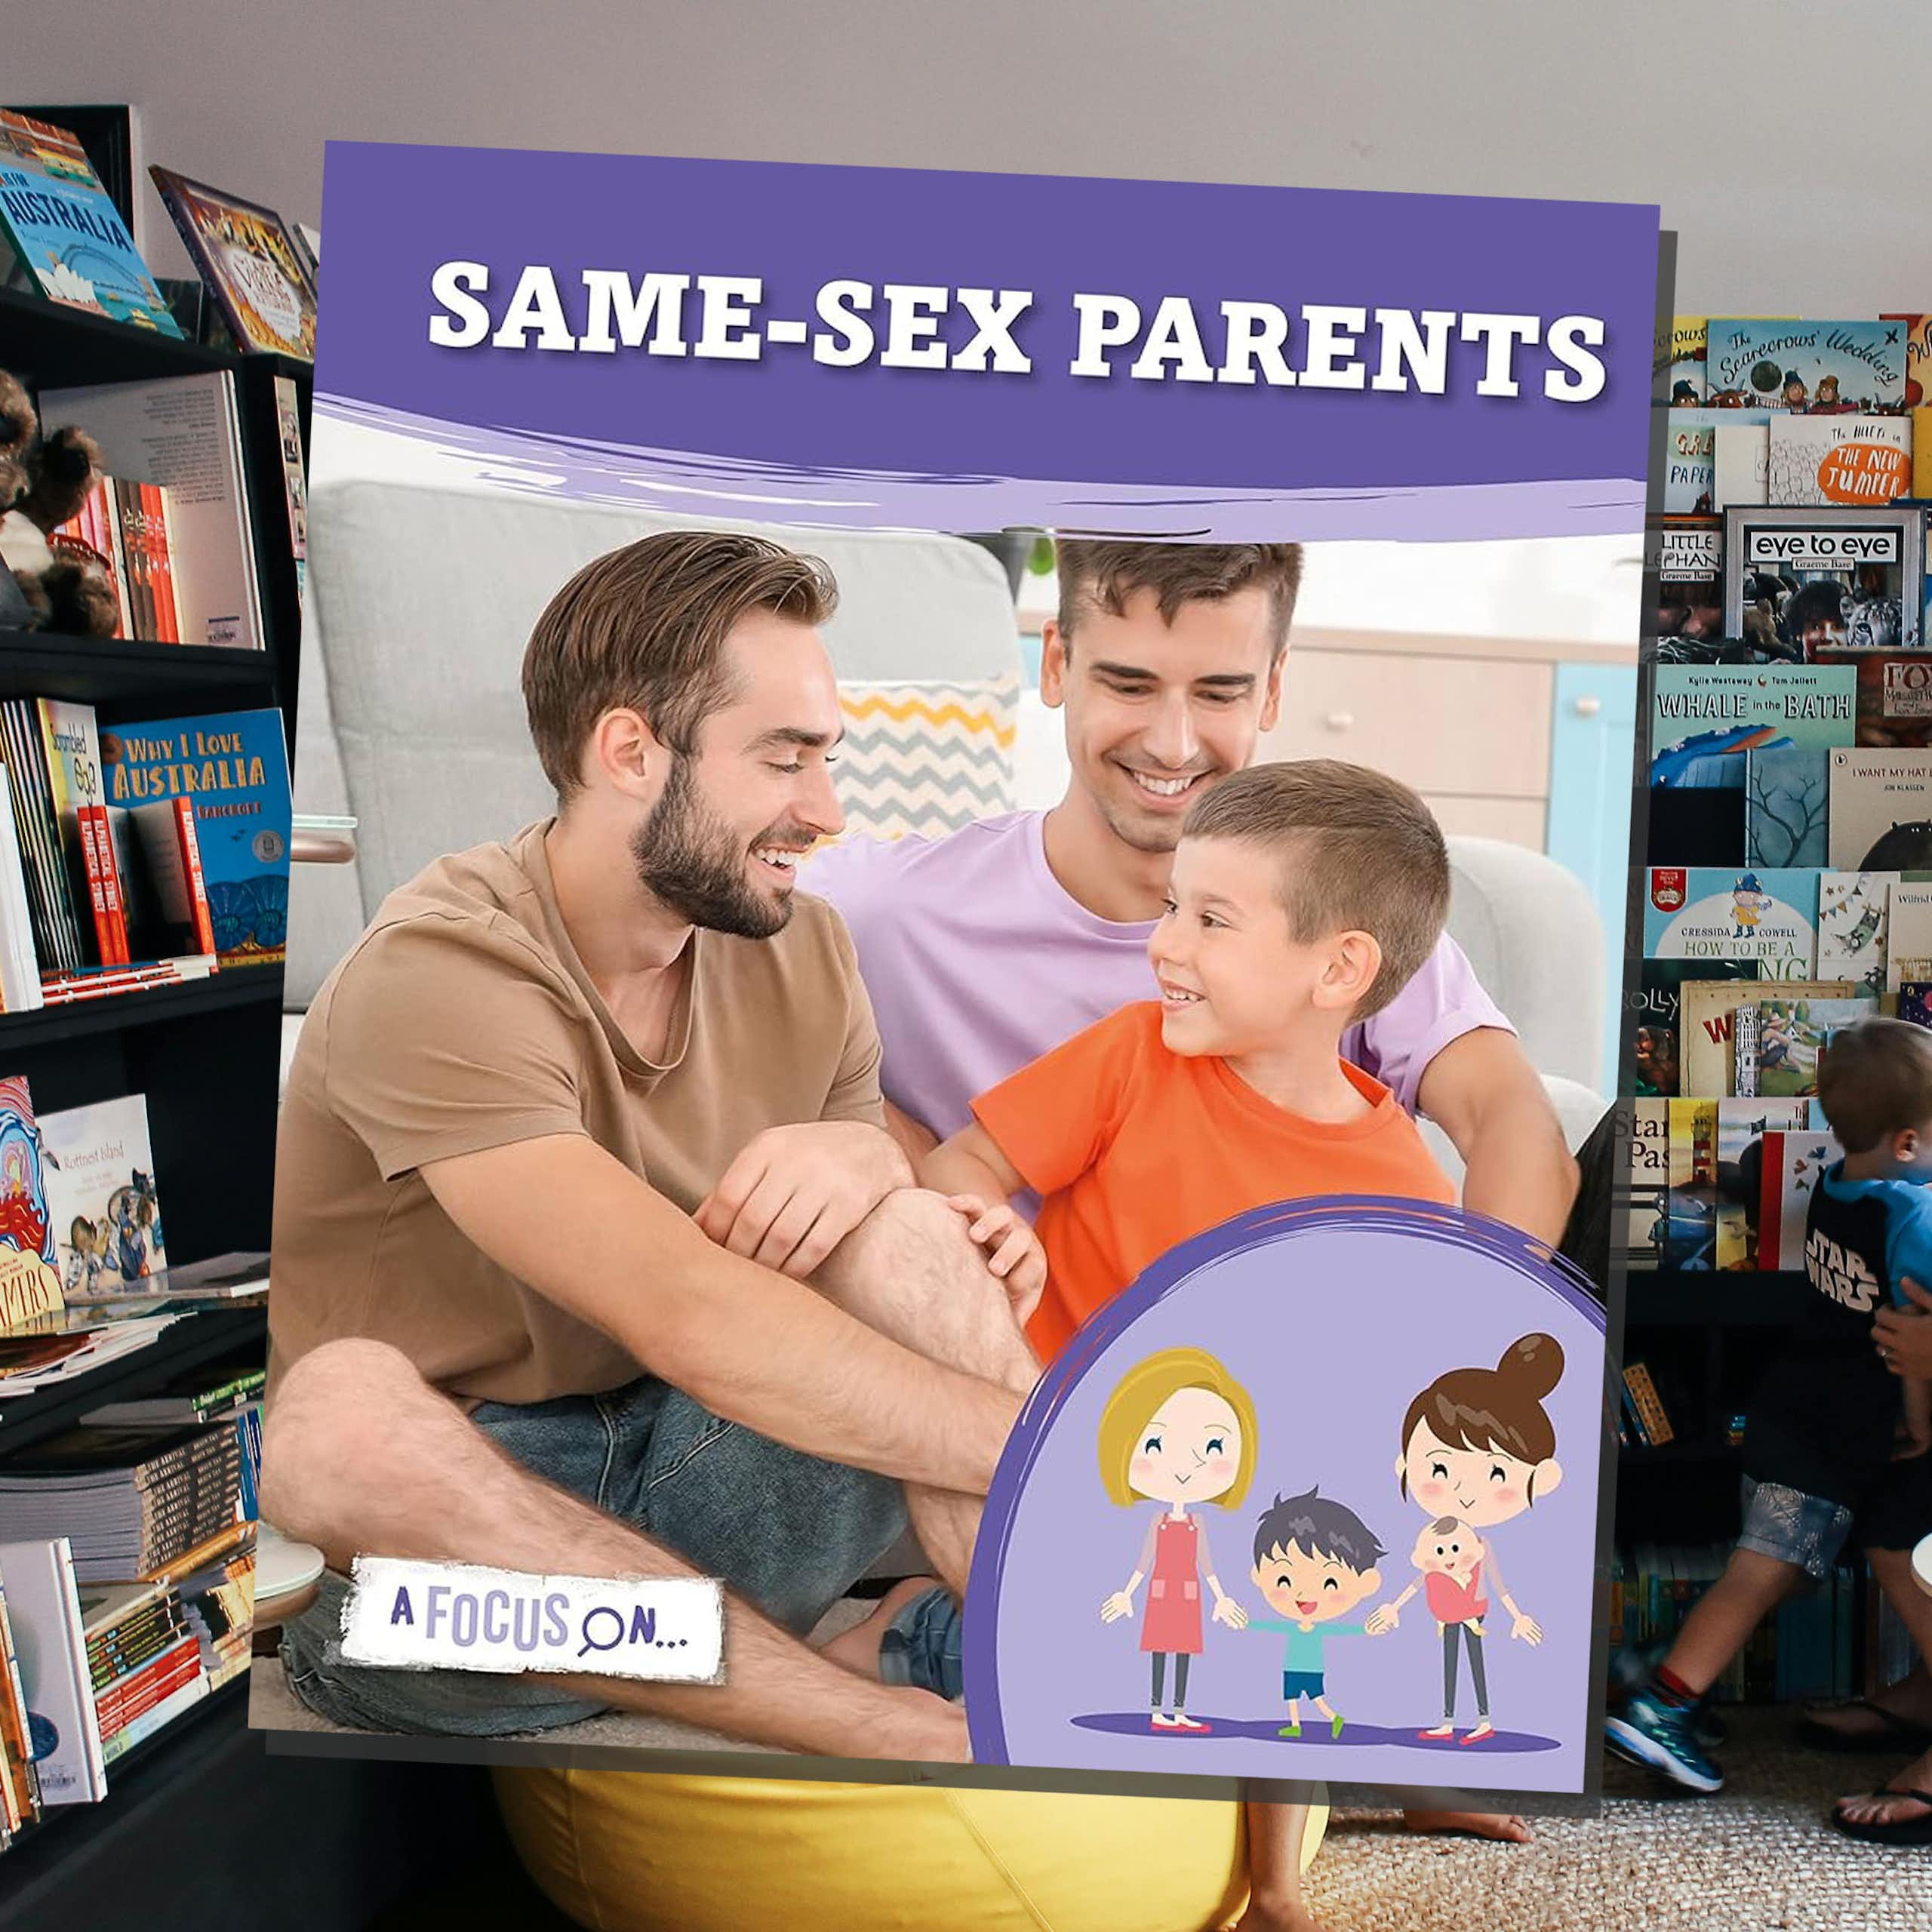 A Sydney council has banned books with same-sex parents from its libraries. But since when did councils ban books?